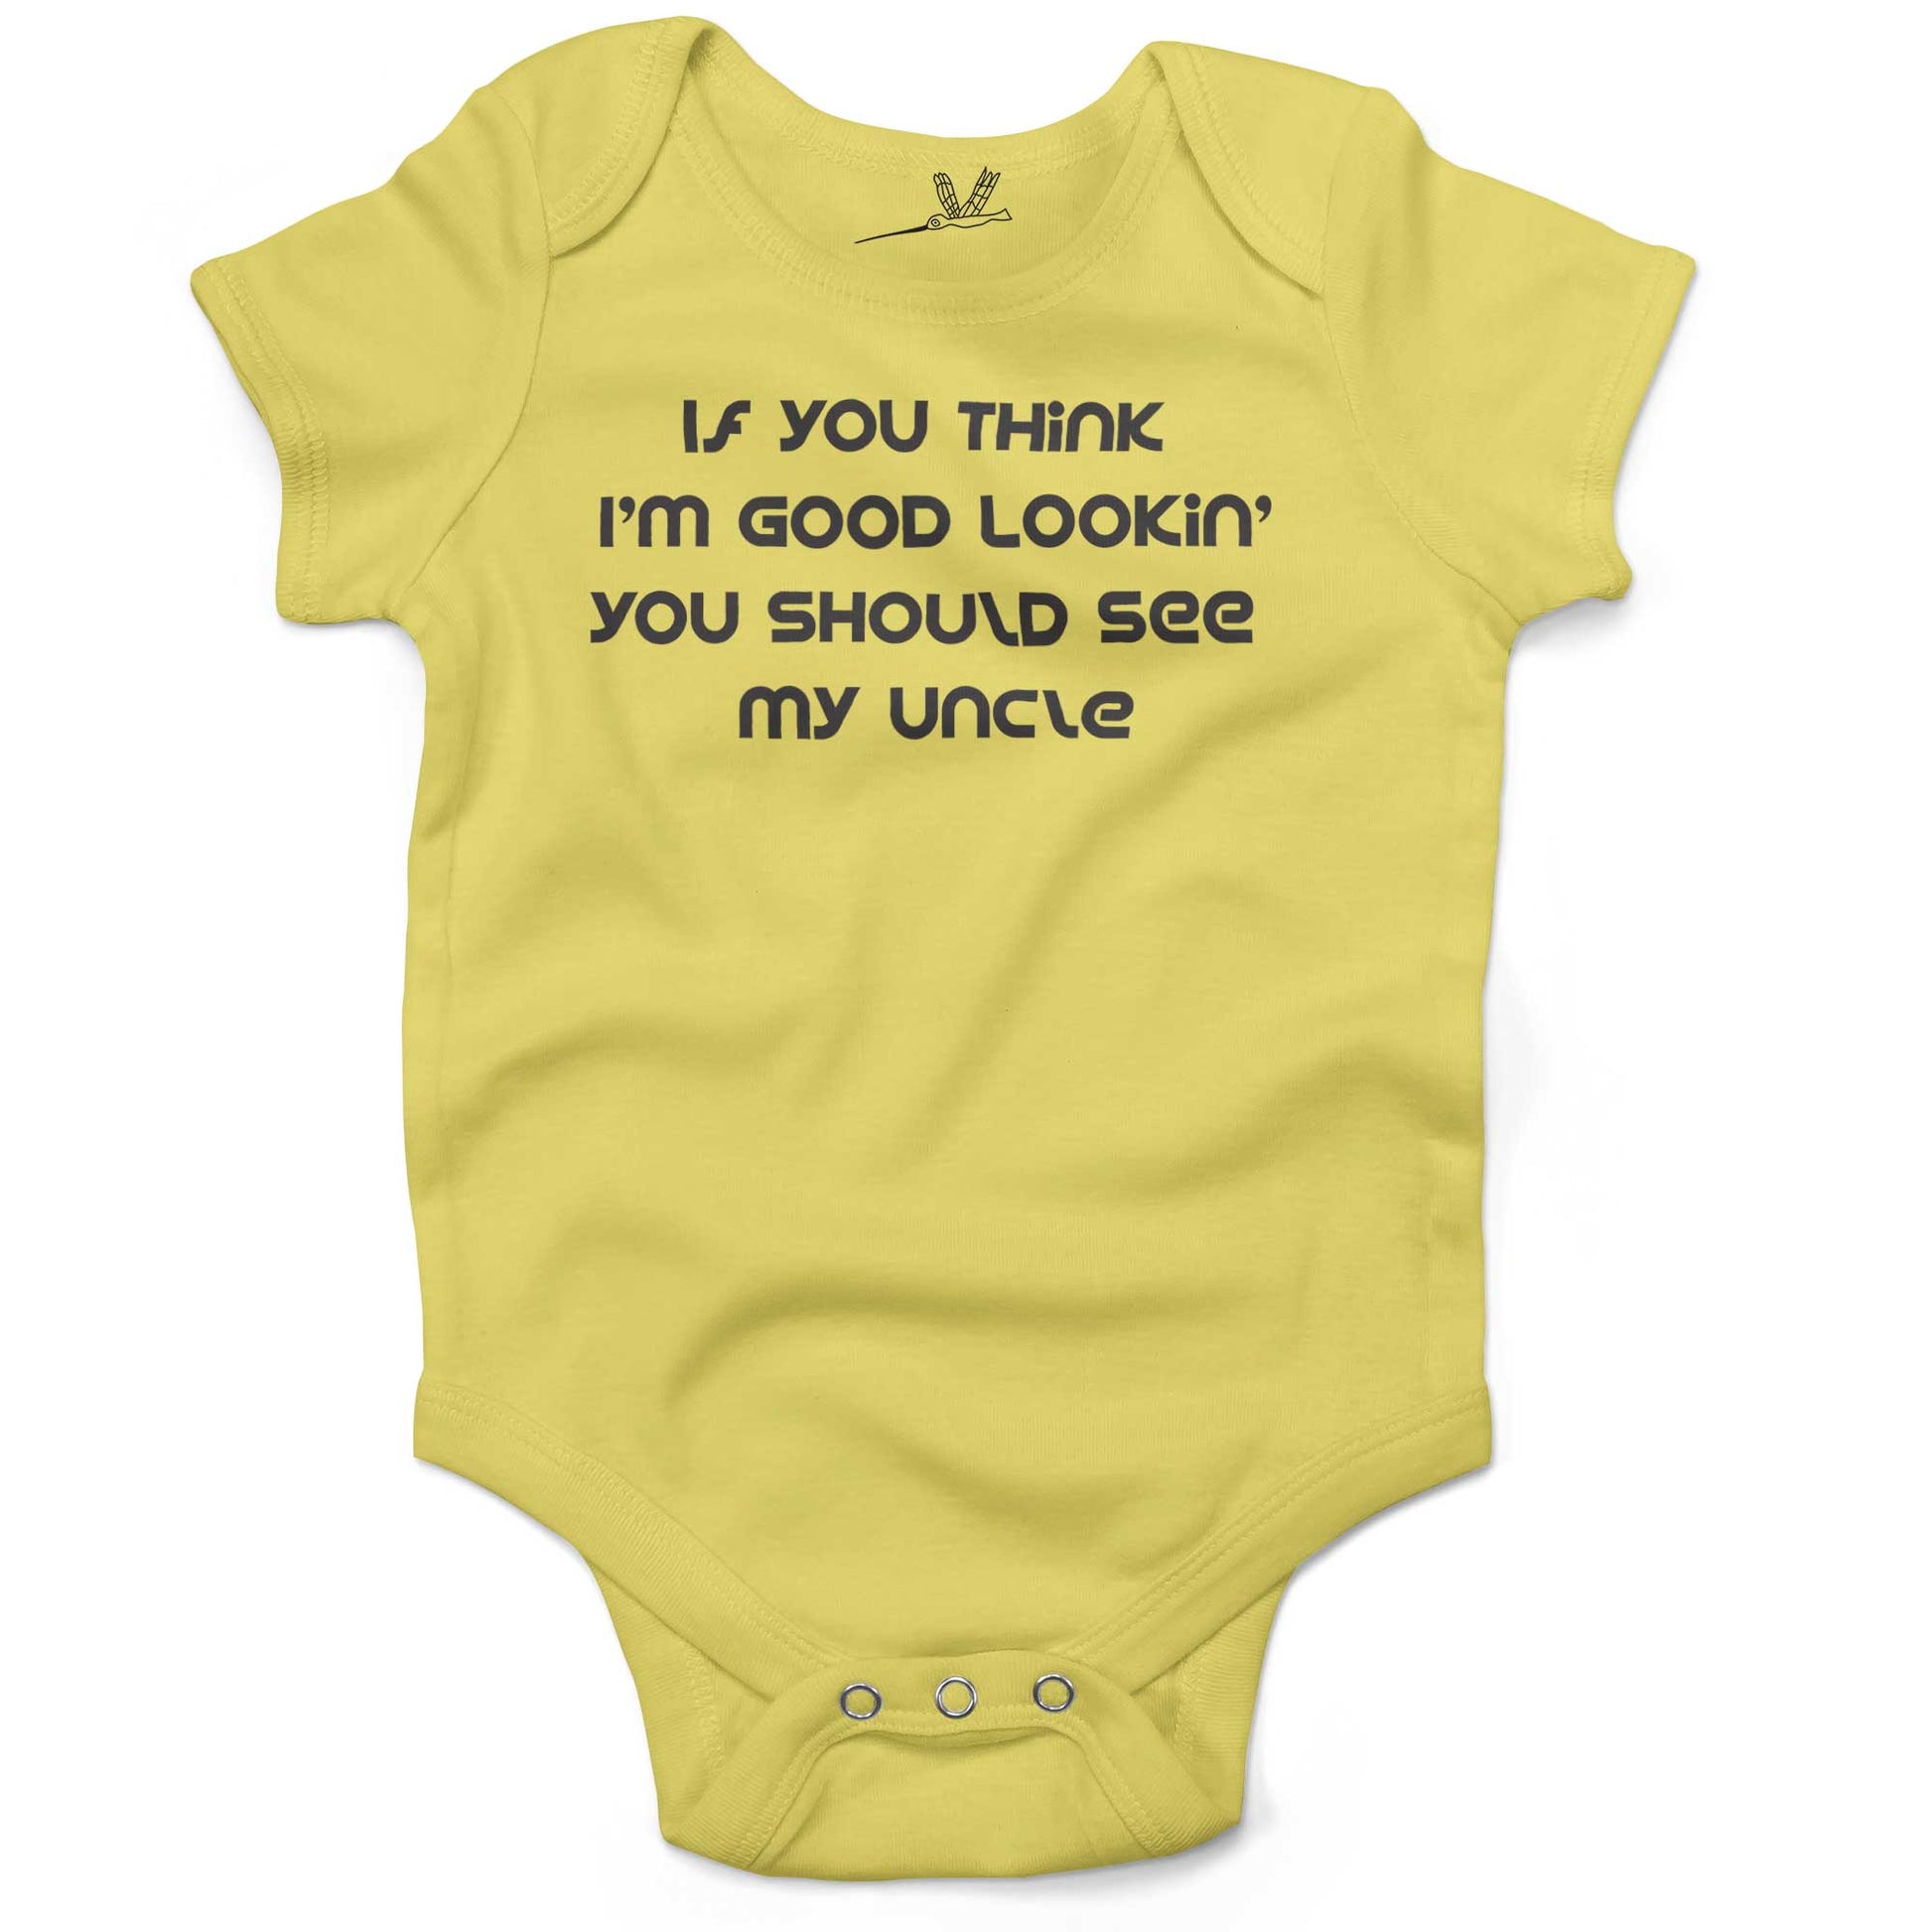 If You Think I'm Good Lookin' You Should See My Uncle Infant Bodysuit or Raglan Tee-Yellow-3-6 months